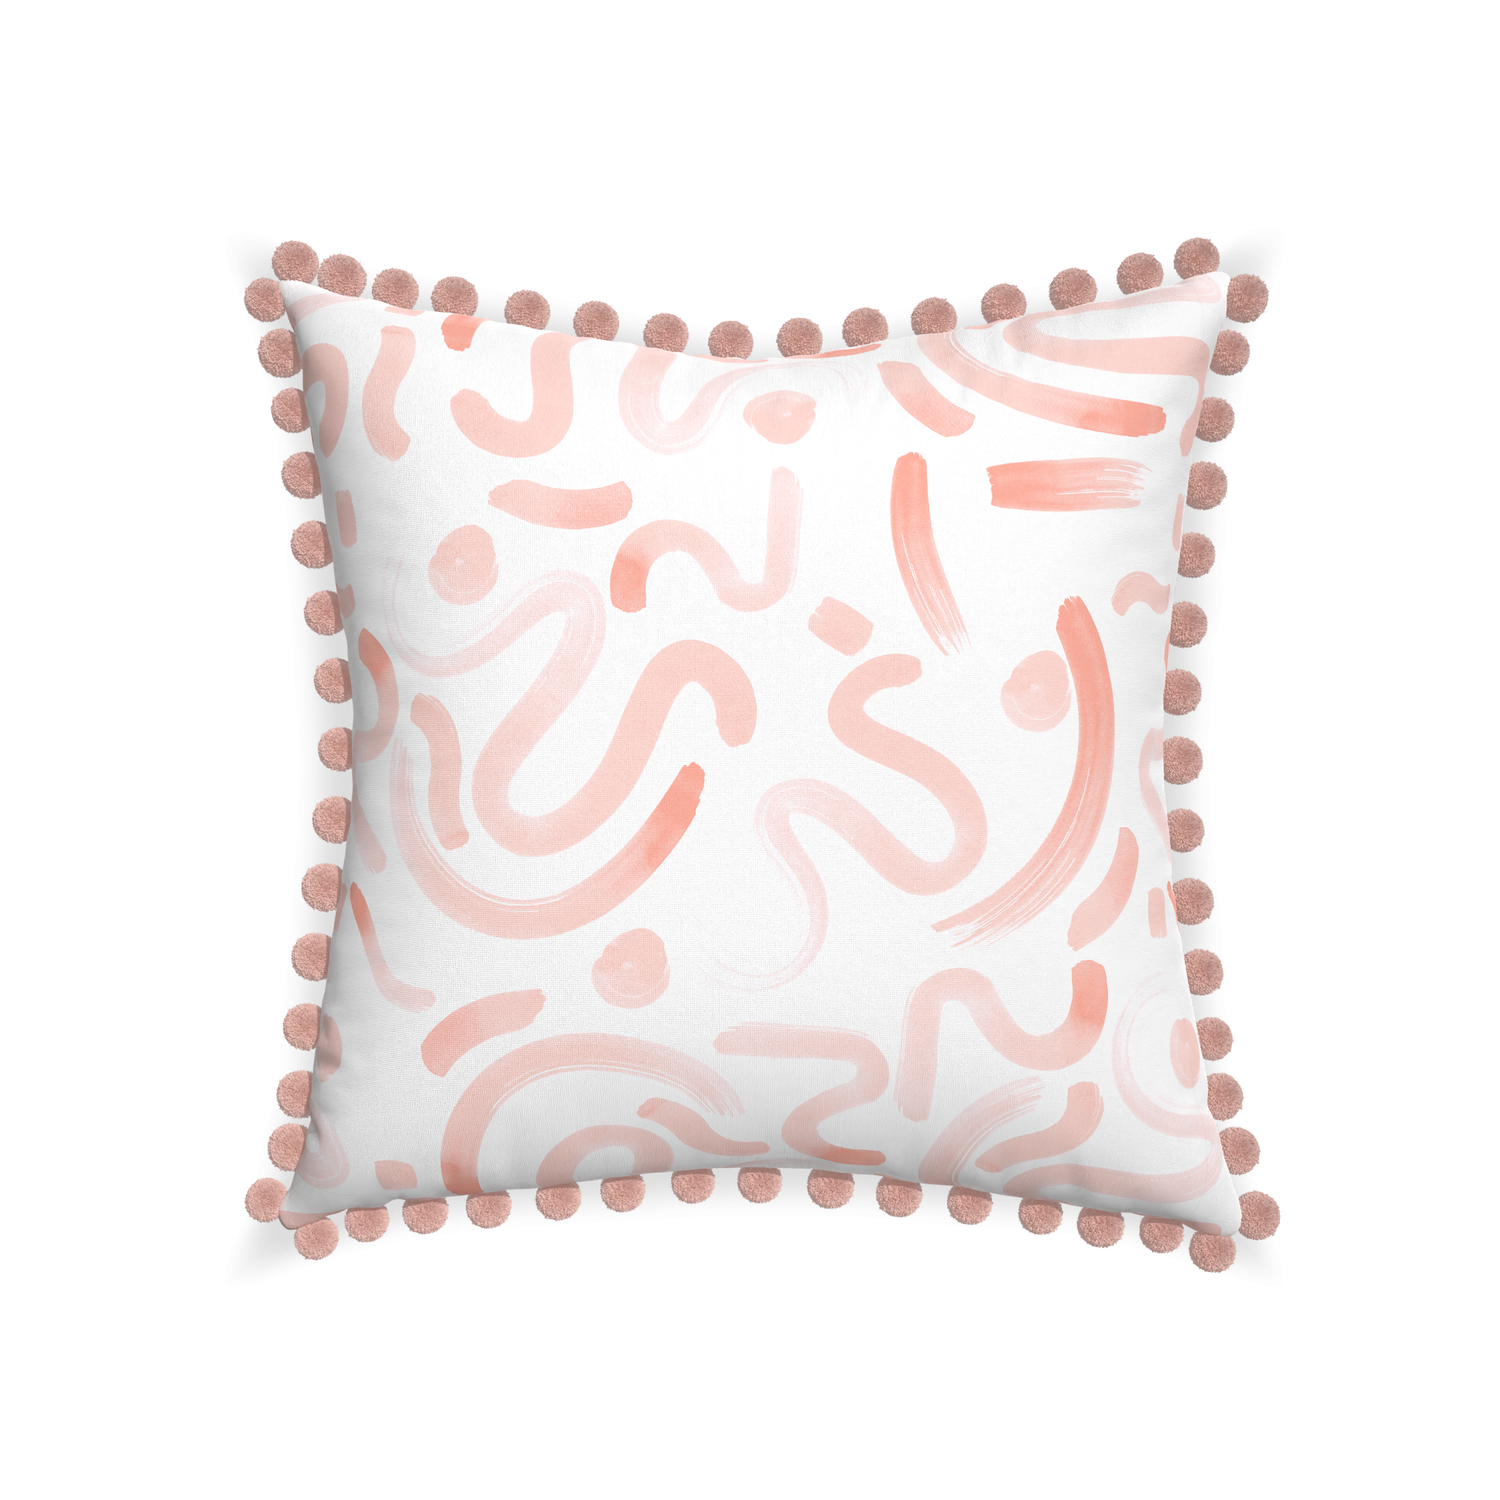 22-square hockney pink custom pink graphicpillow with rose pom pom on white background